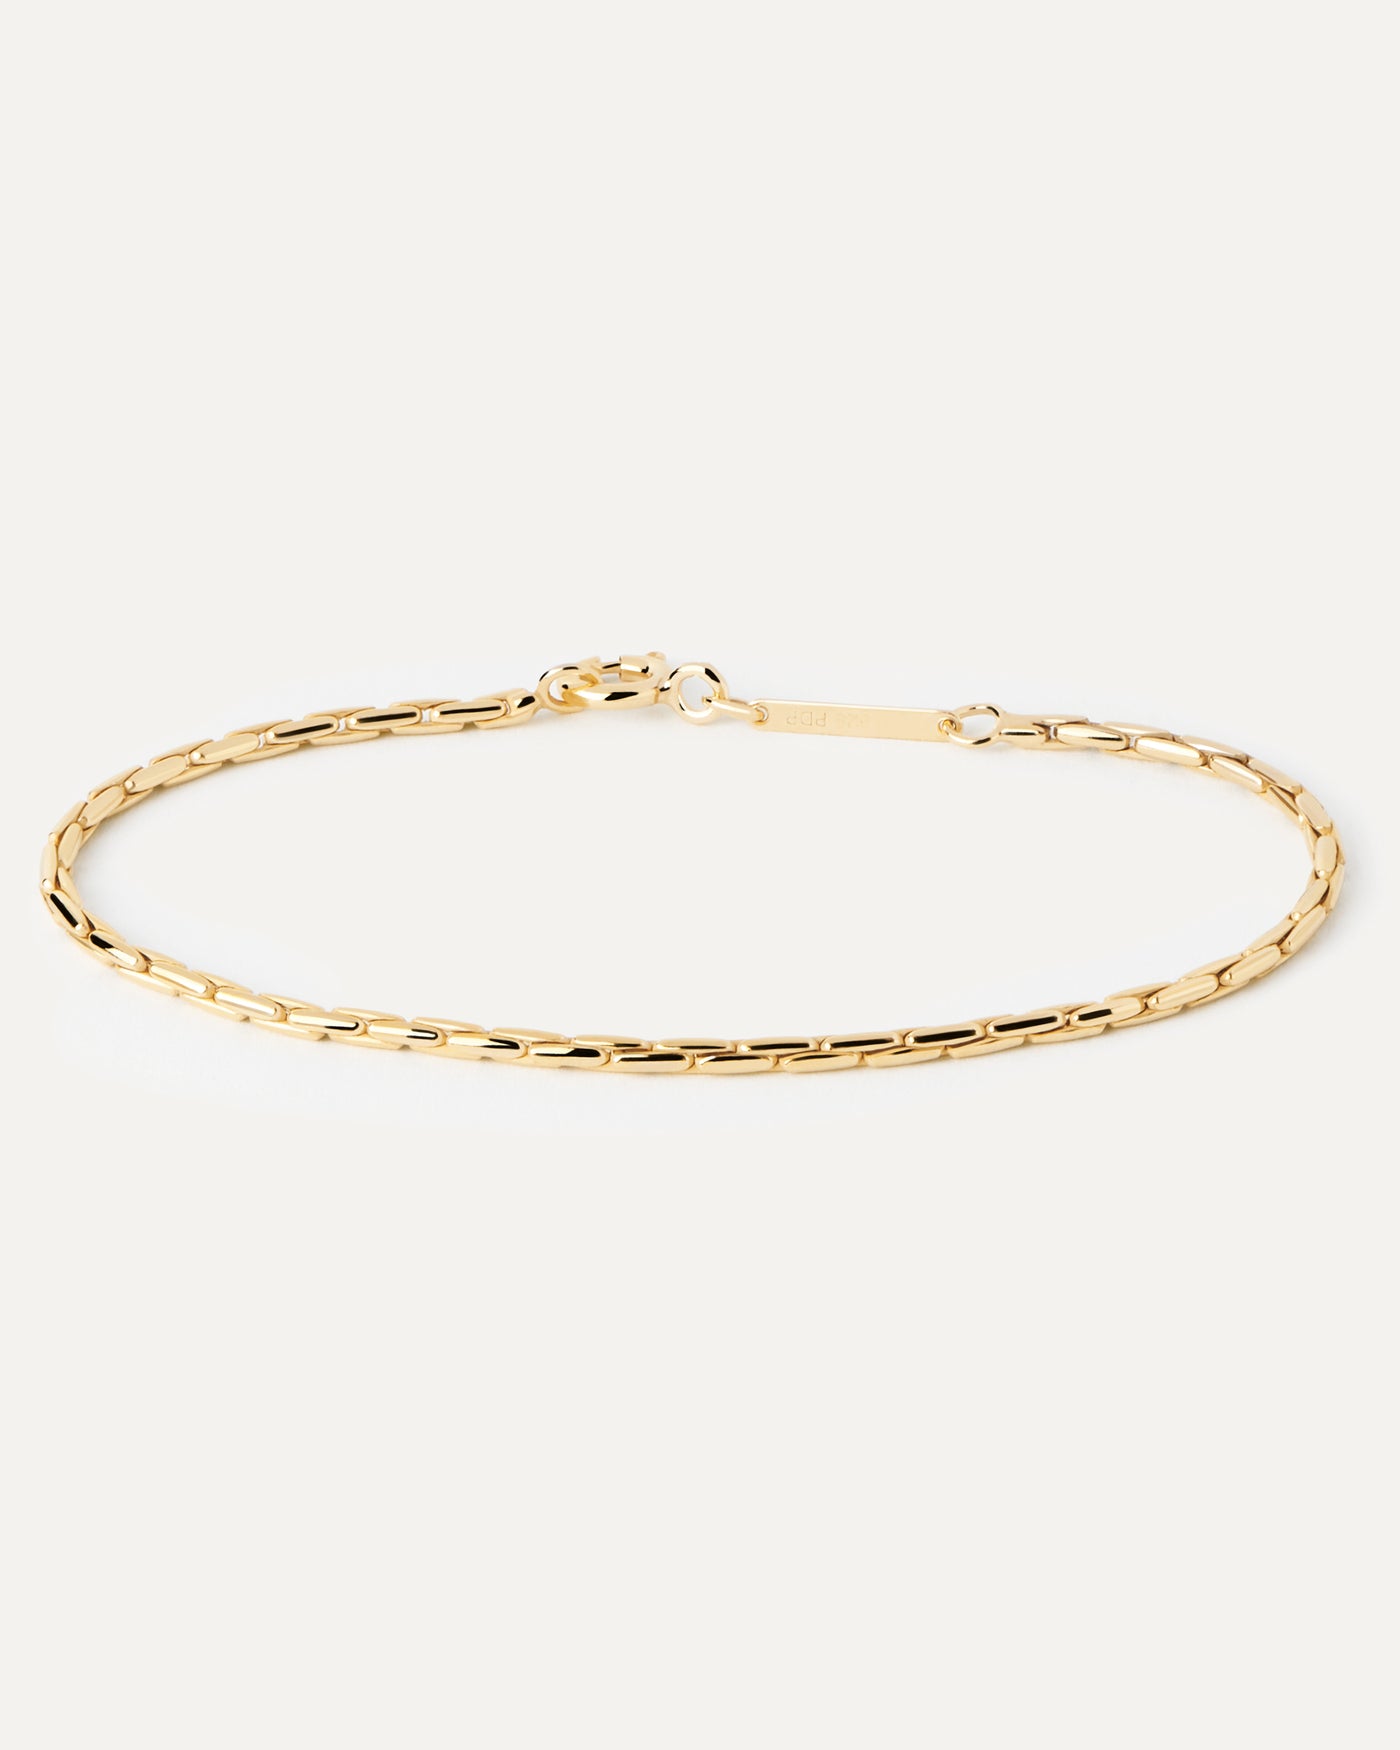 2023 Selection | Boston Chain Bracelet. Gold-plated boston chain bracelet with elongated links. Get the latest arrival from PDPAOLA. Place your order safely and get this Best Seller. Free Shipping.